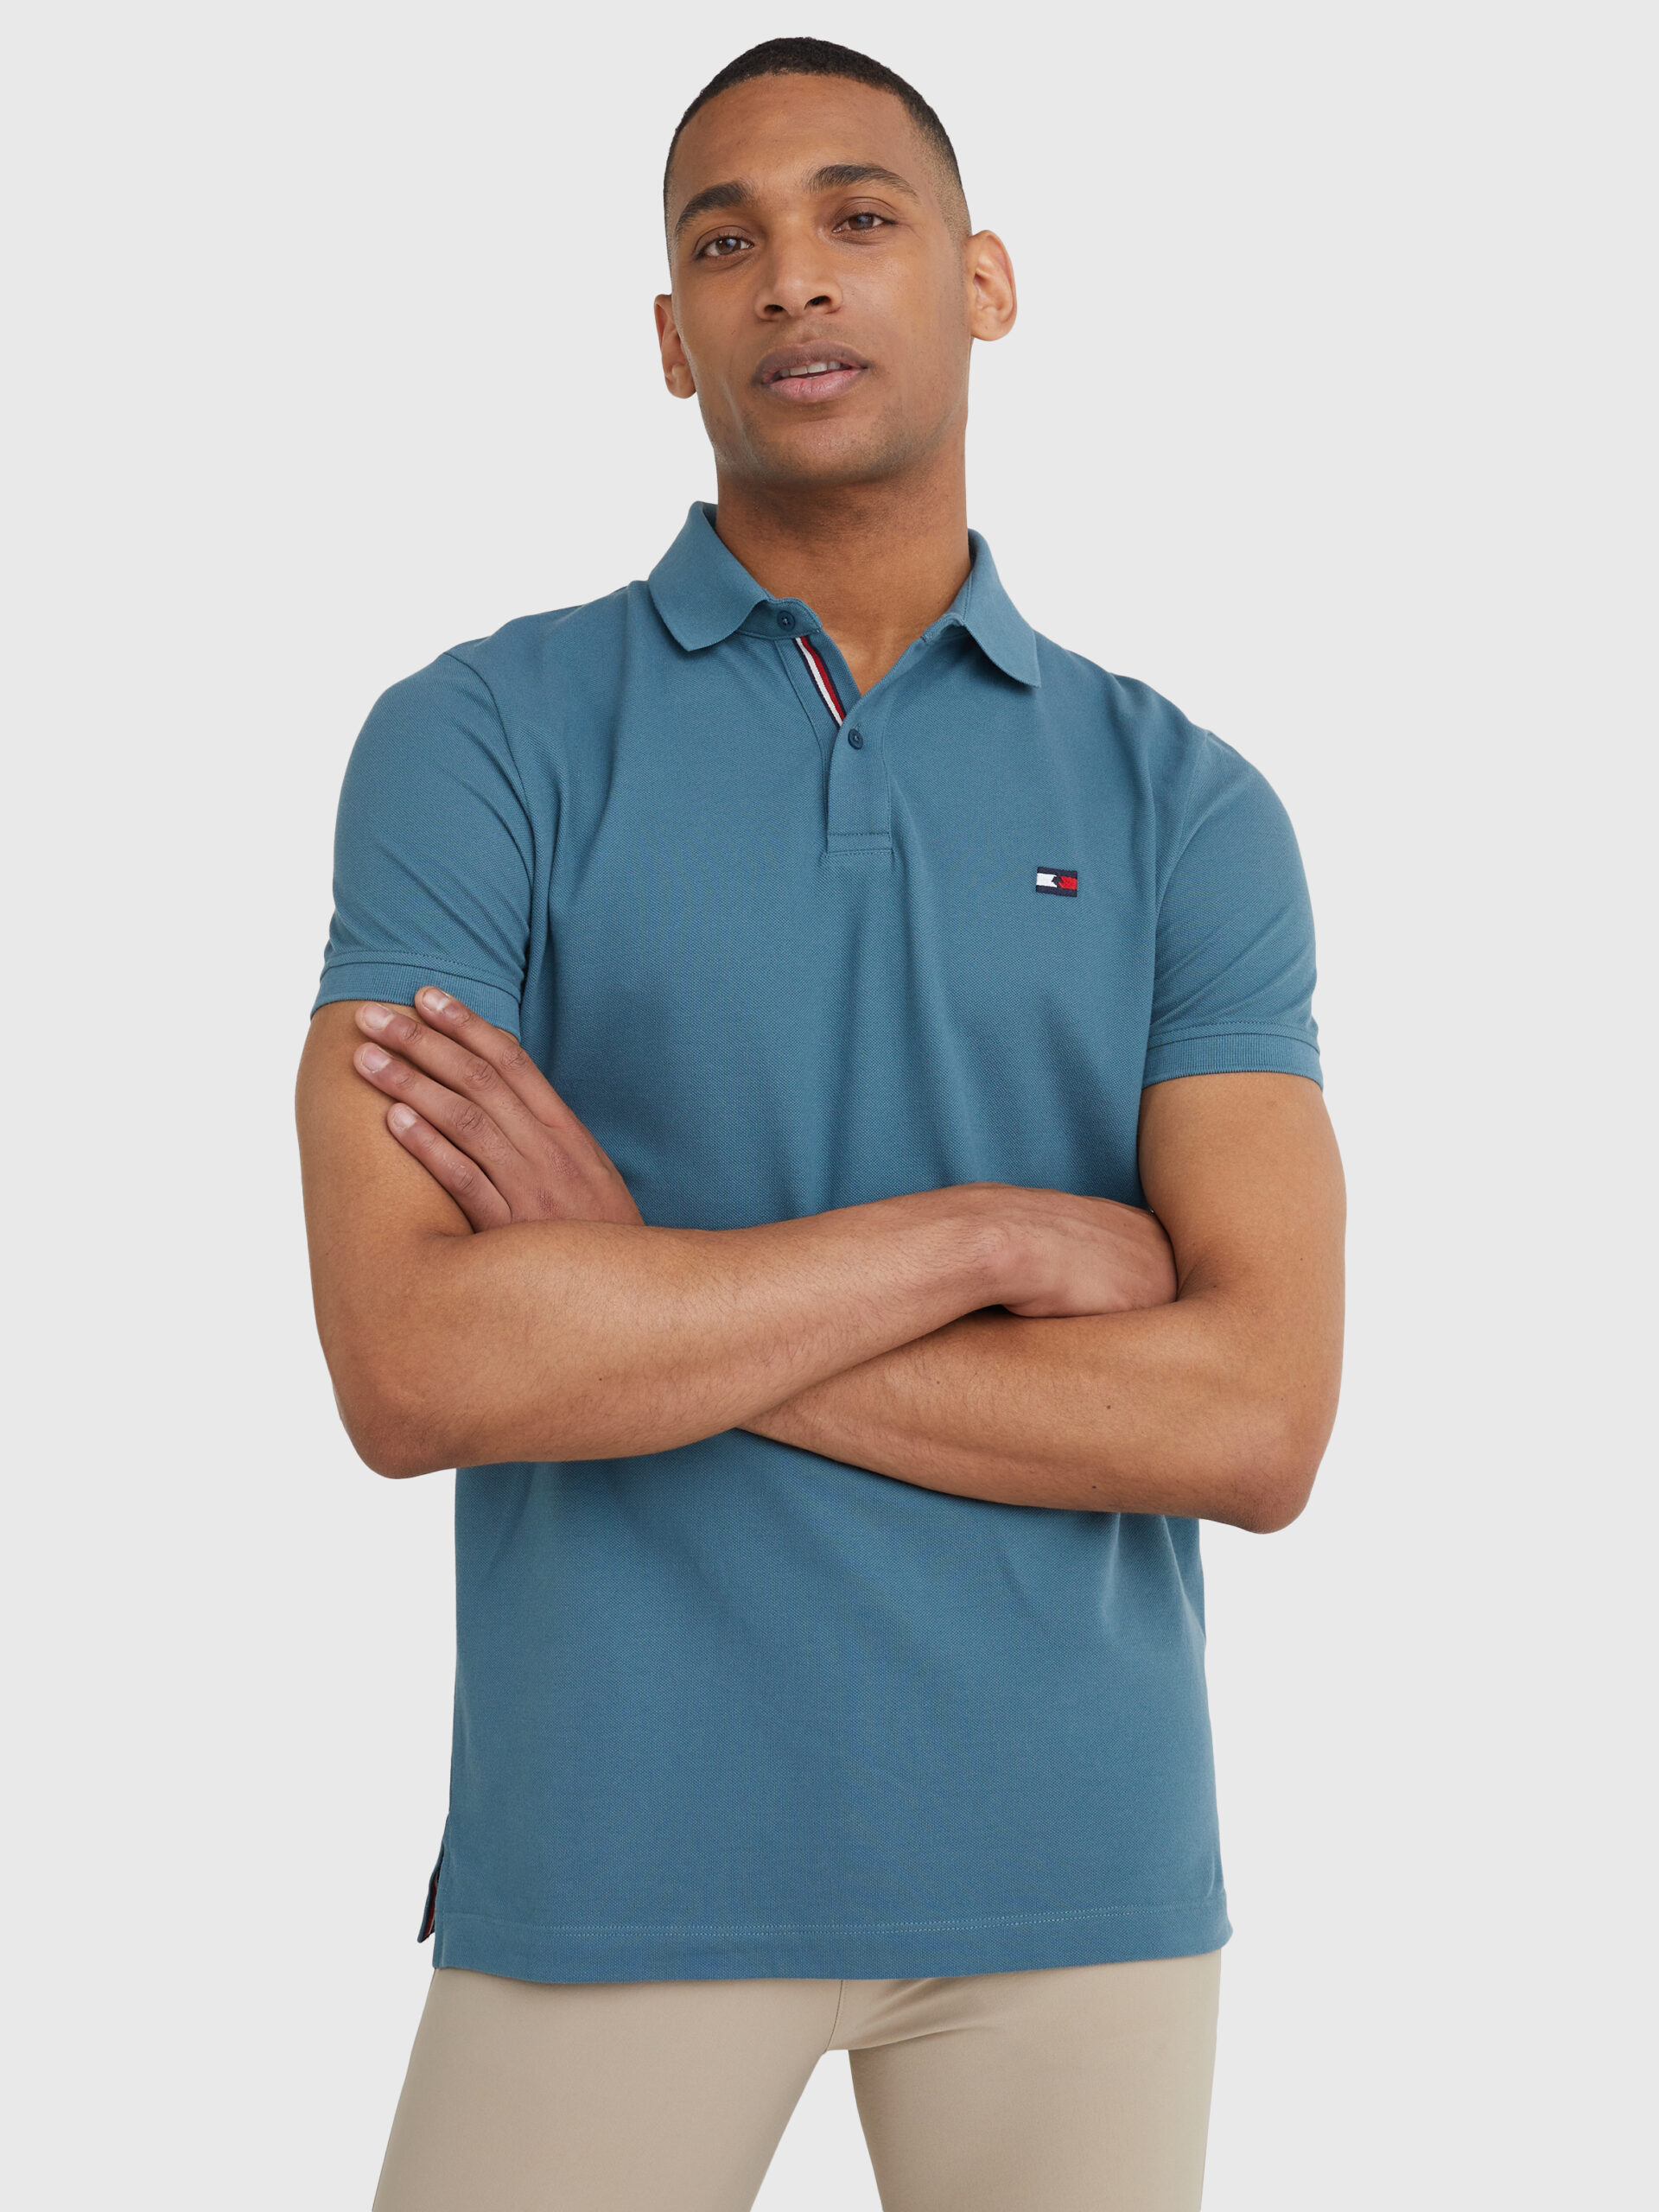 hire Truce Rank TOMMY HILFIGER SS'22 Polo Shirt Men - Spicehorse